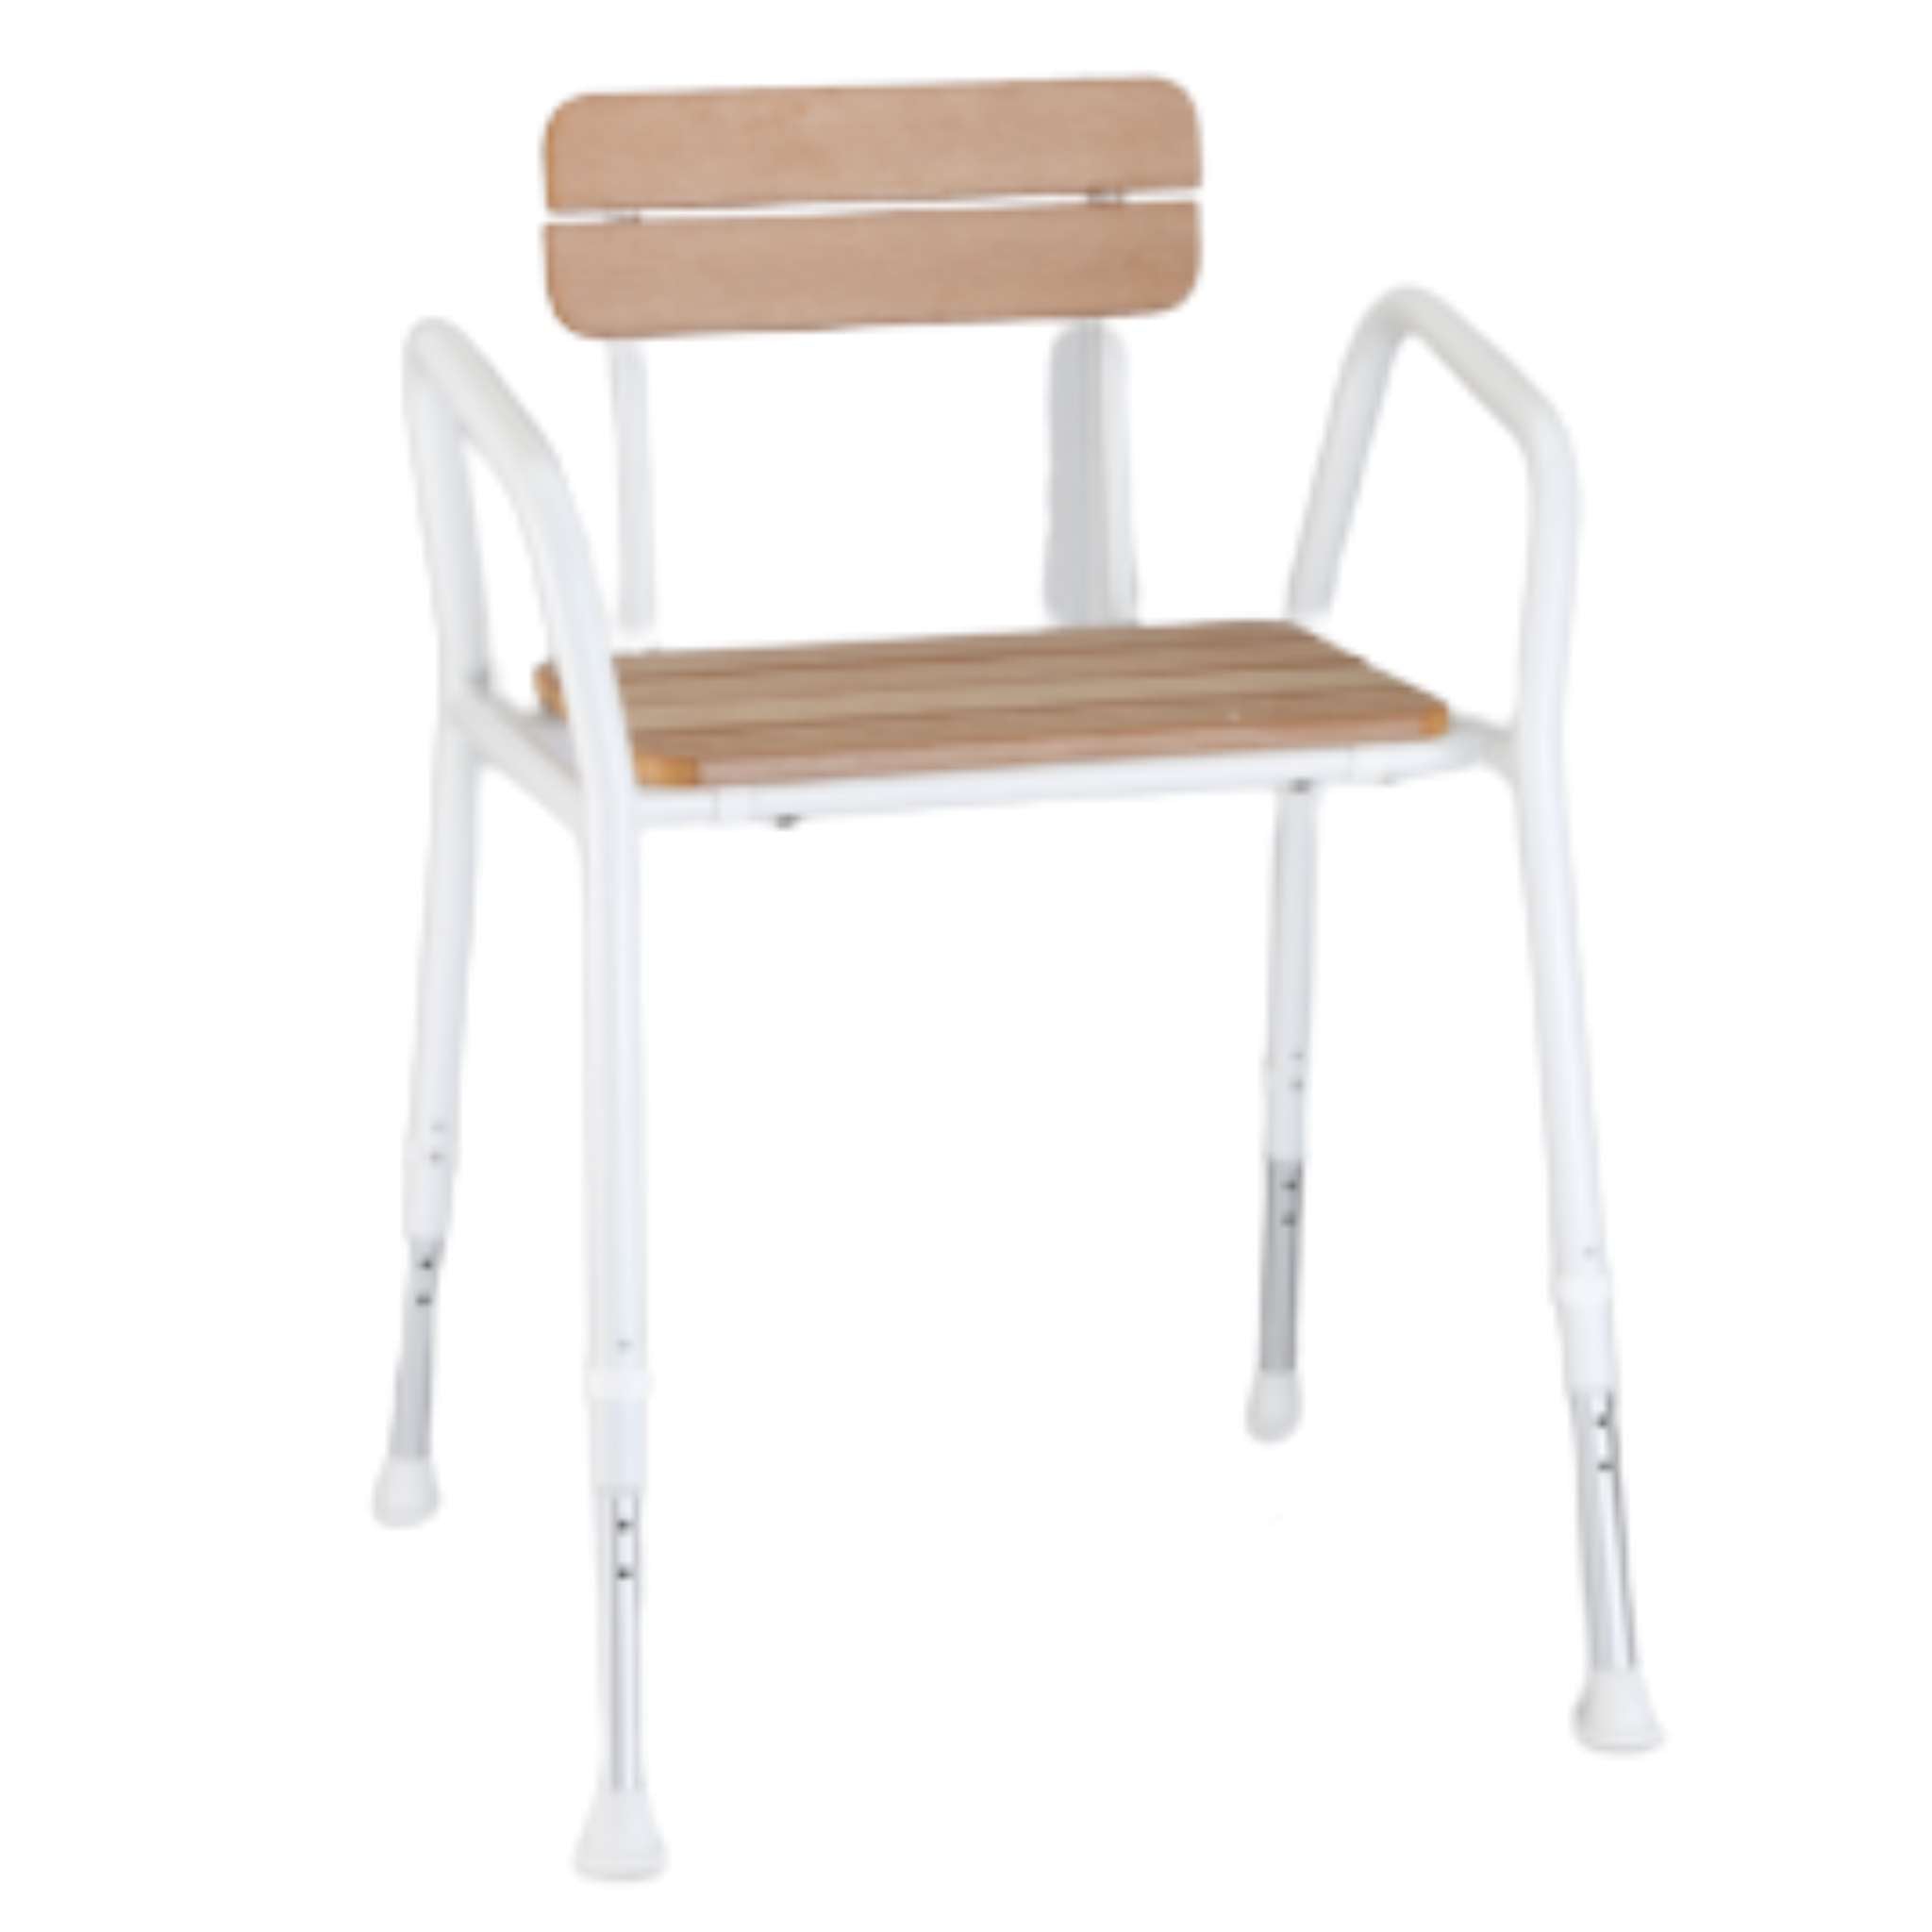 Delta C45 Timber Shower Chair